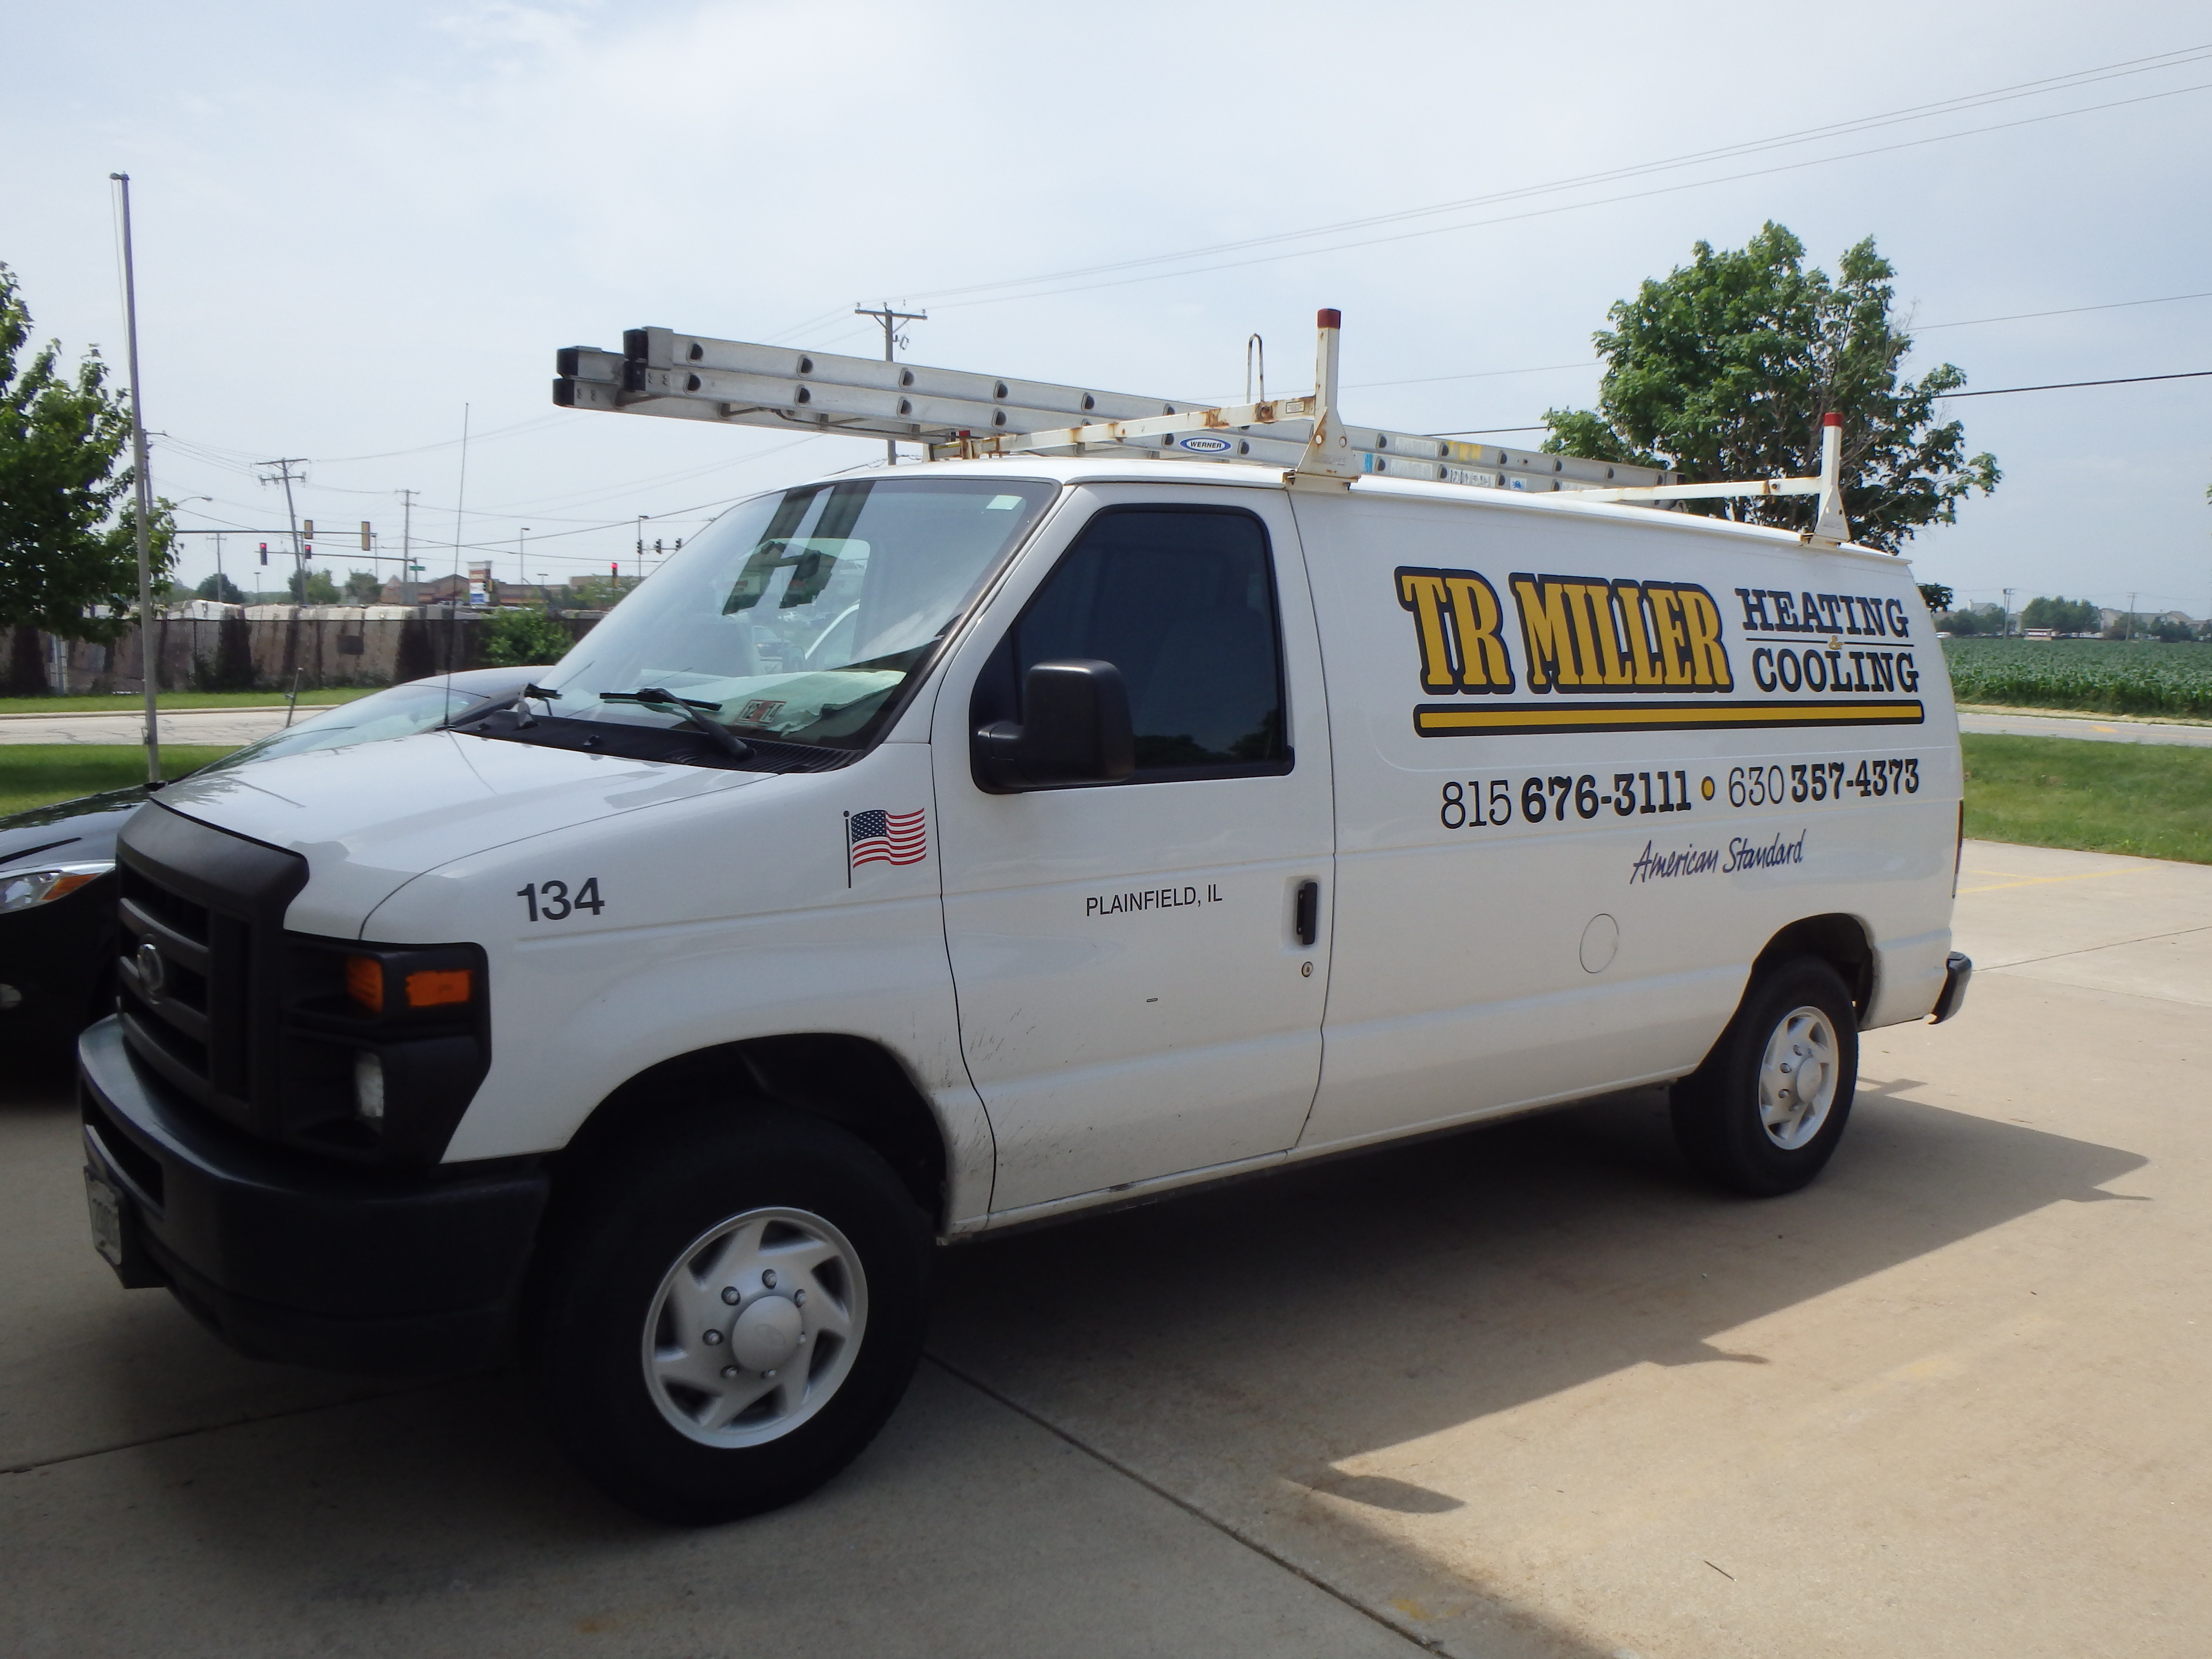 TR Miller Heating & Cooling Photo